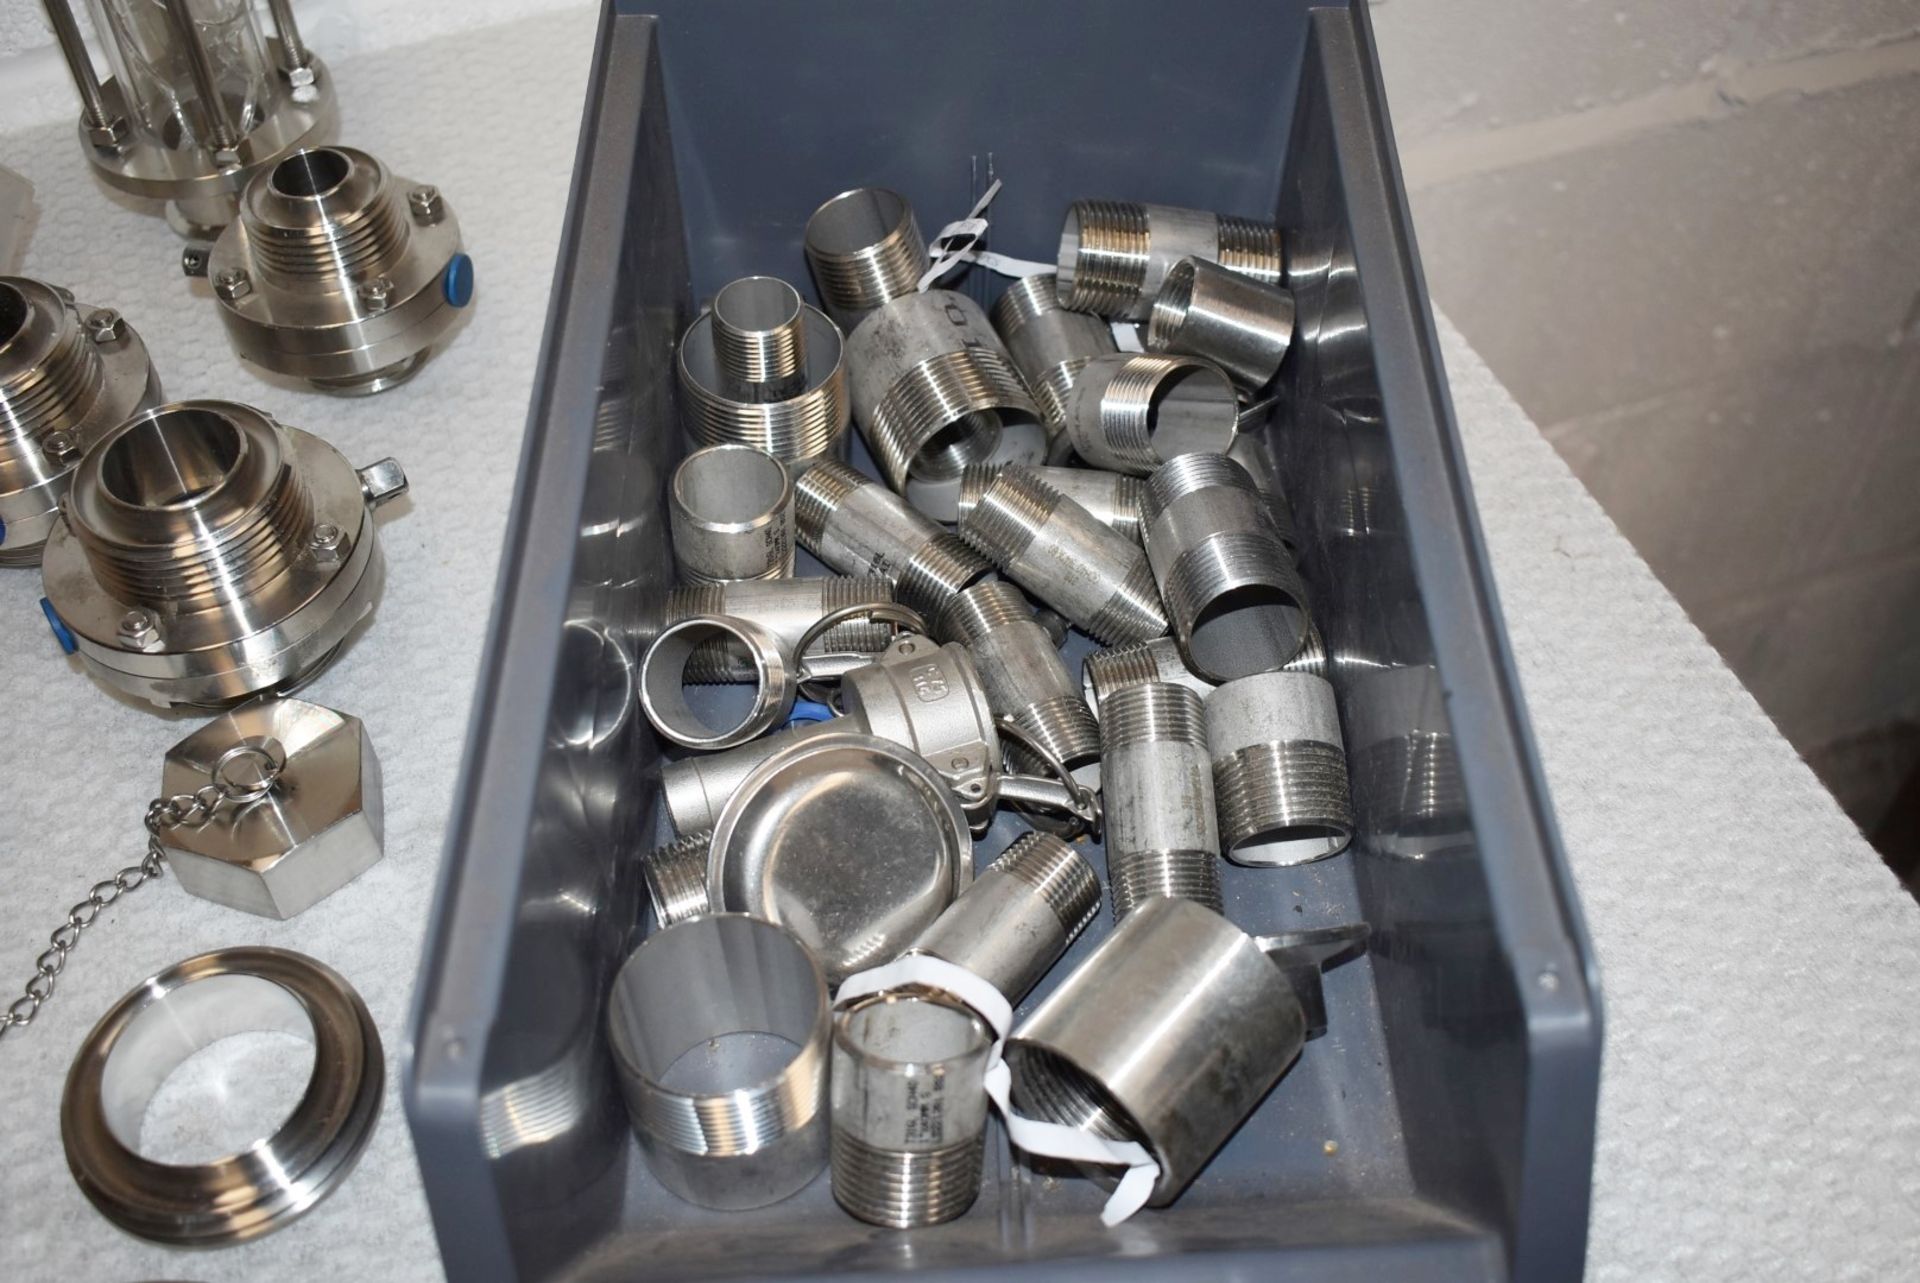 Assorted Job Lot of Stainless Steel Fittings For Brewery Equipment - Includes Approx 140 Pieces - - Image 5 of 18